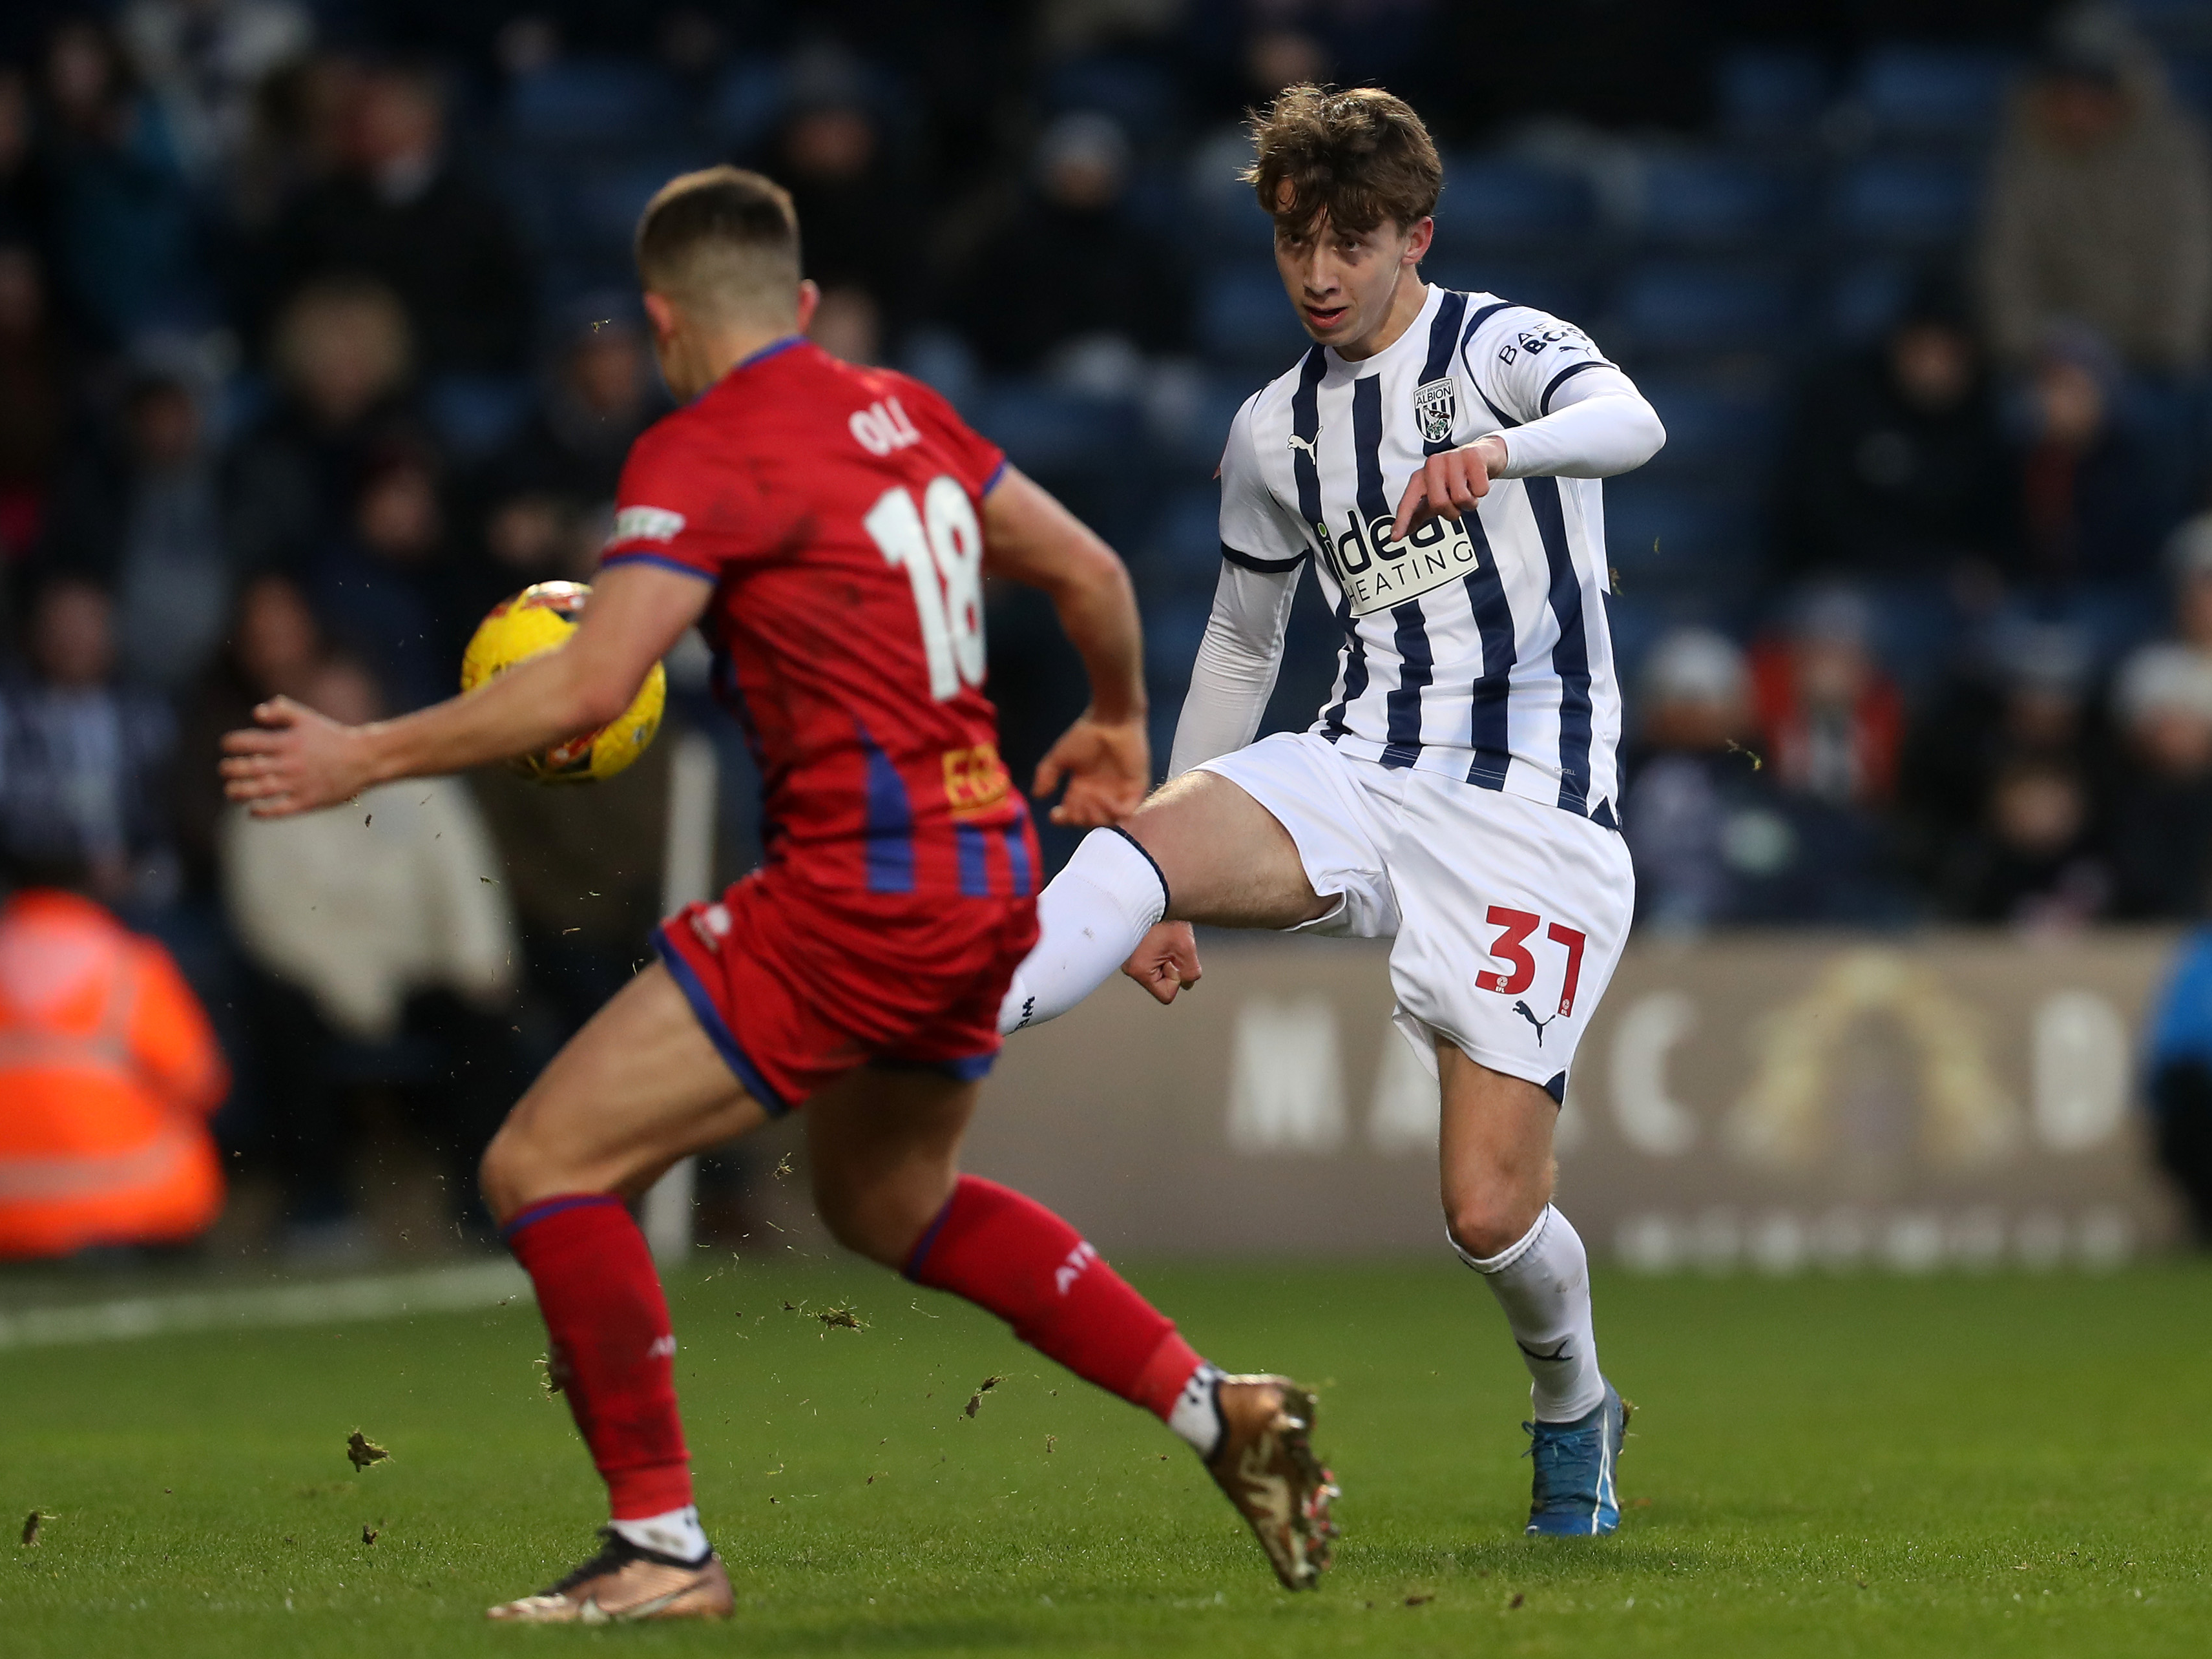 A photo of Harry Whitwell, in the 23/24 home kit, in action for Albion in the FA Cup v Alderhsot